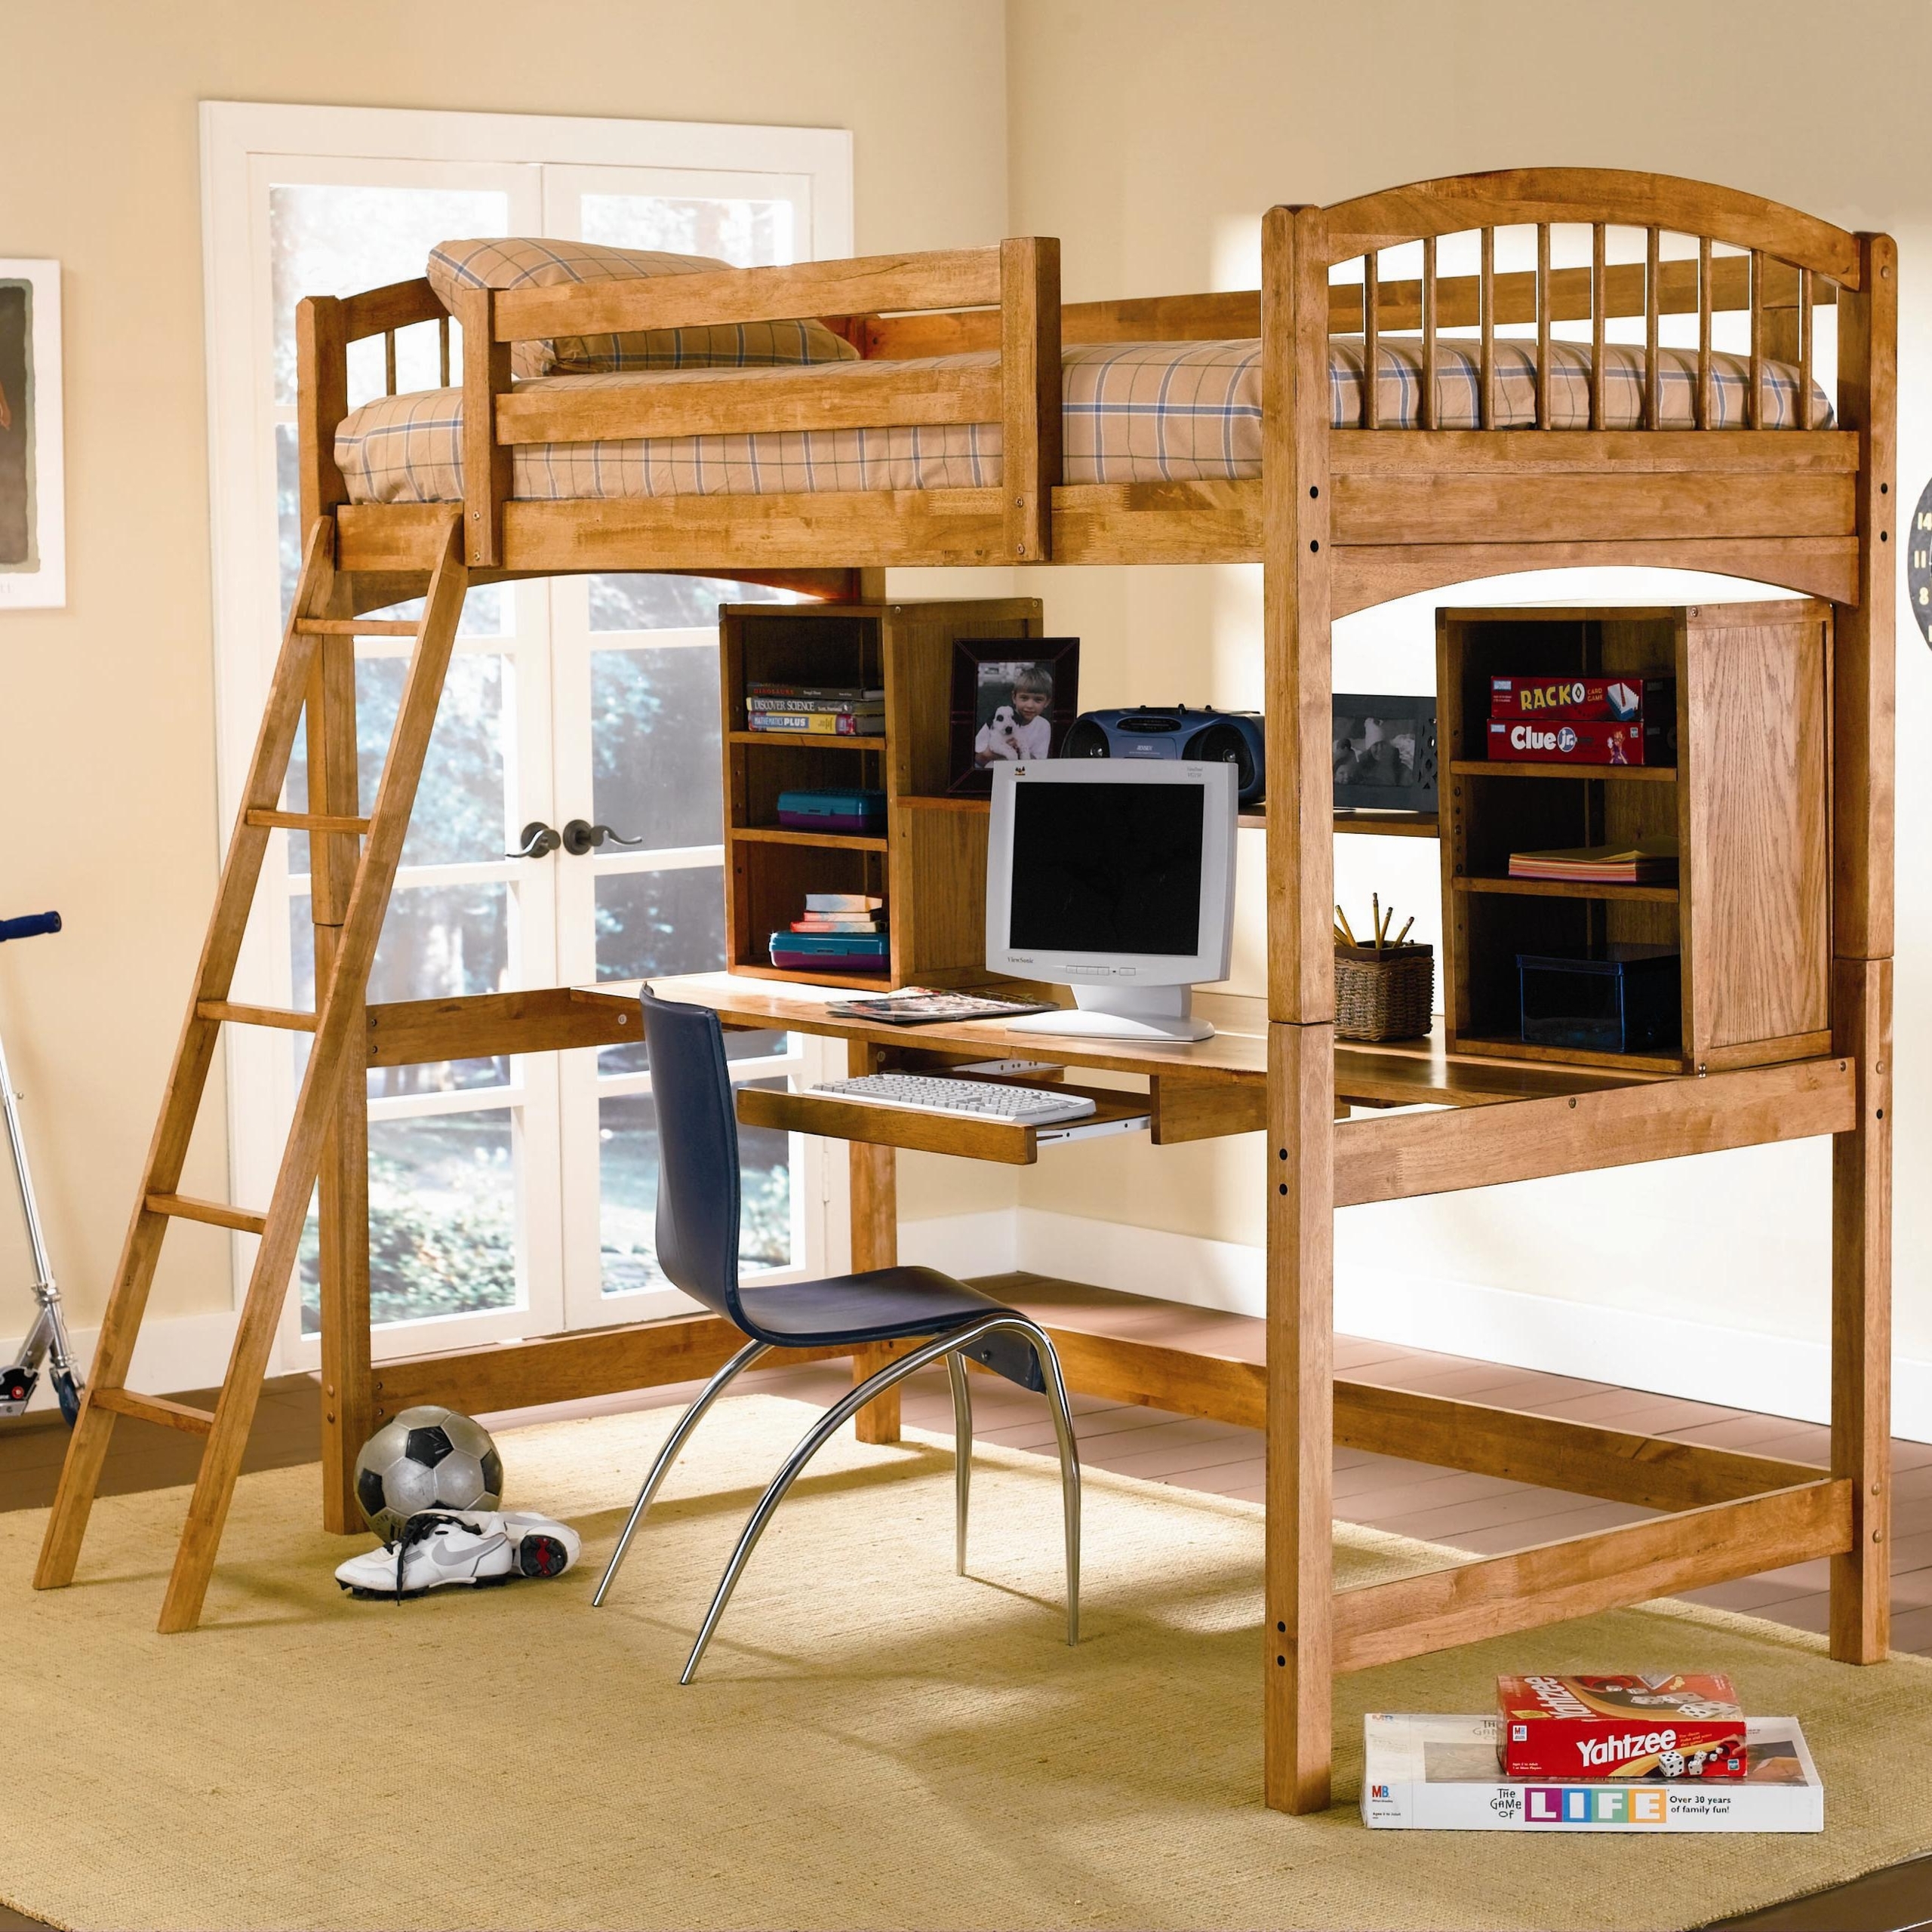 Full Size Loft Bed With Desk Visualhunt, Wood Frame Full Size Loft Bed With Desk